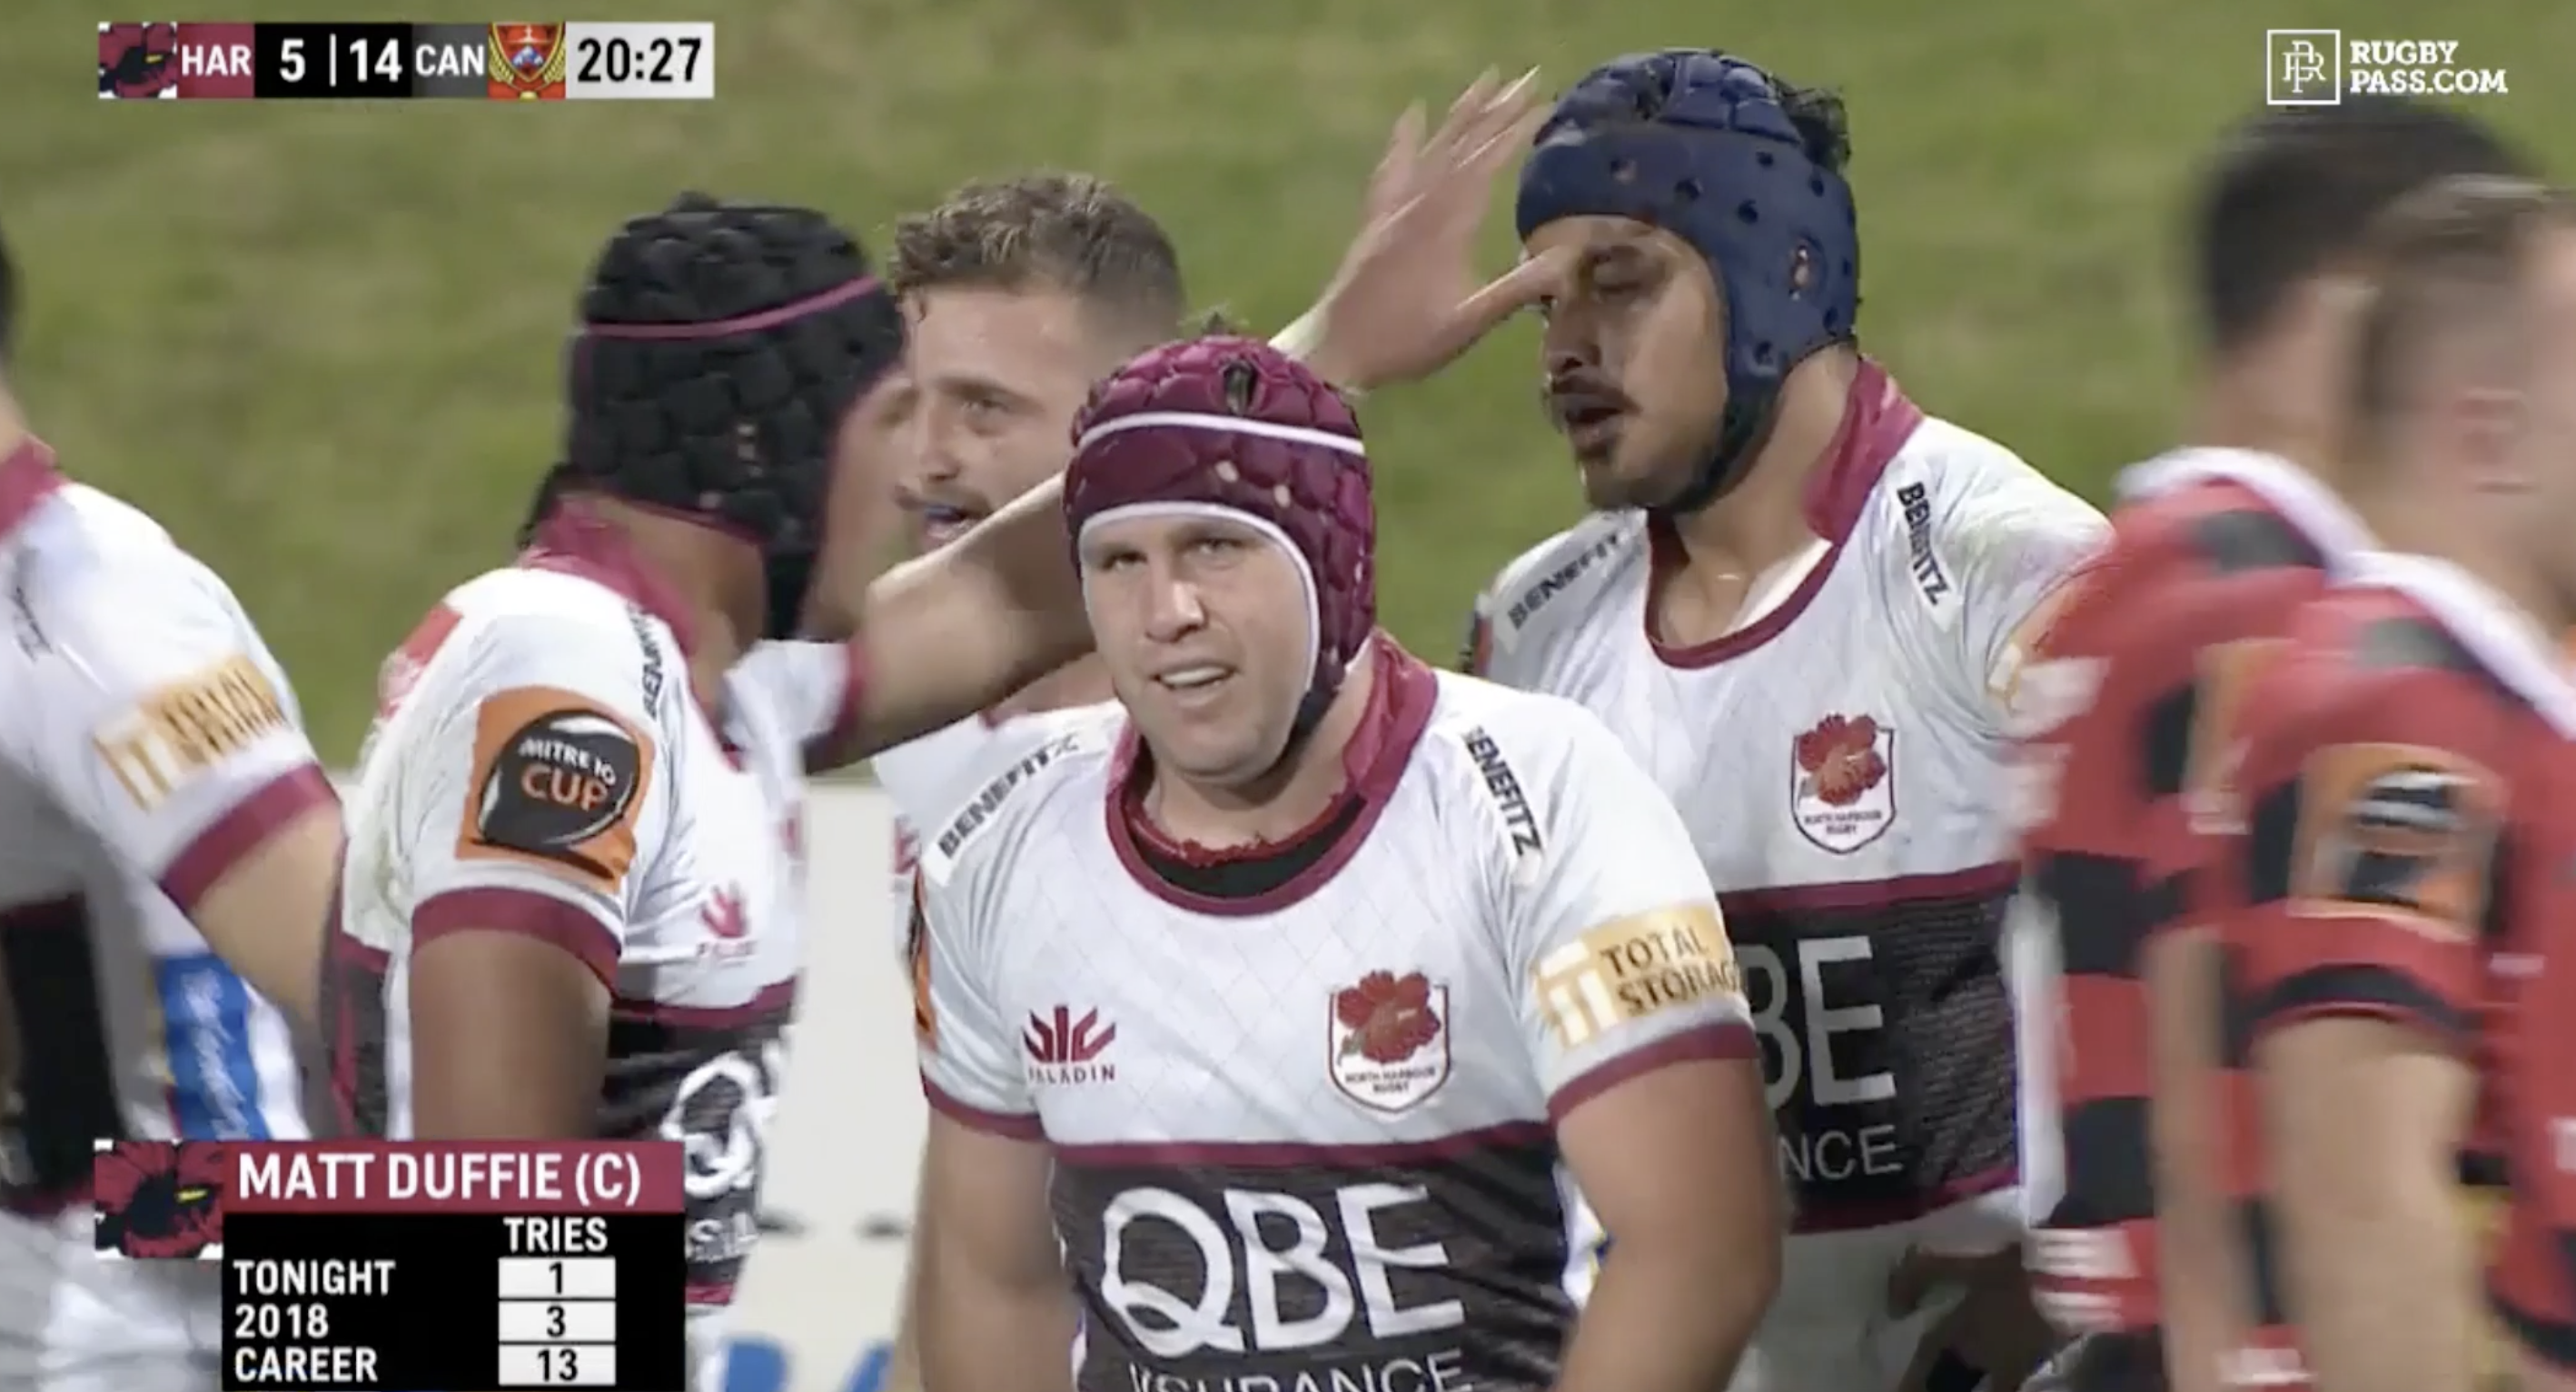 FILTH: Hooker's obscene pass has local commentators going absolutely POTTY